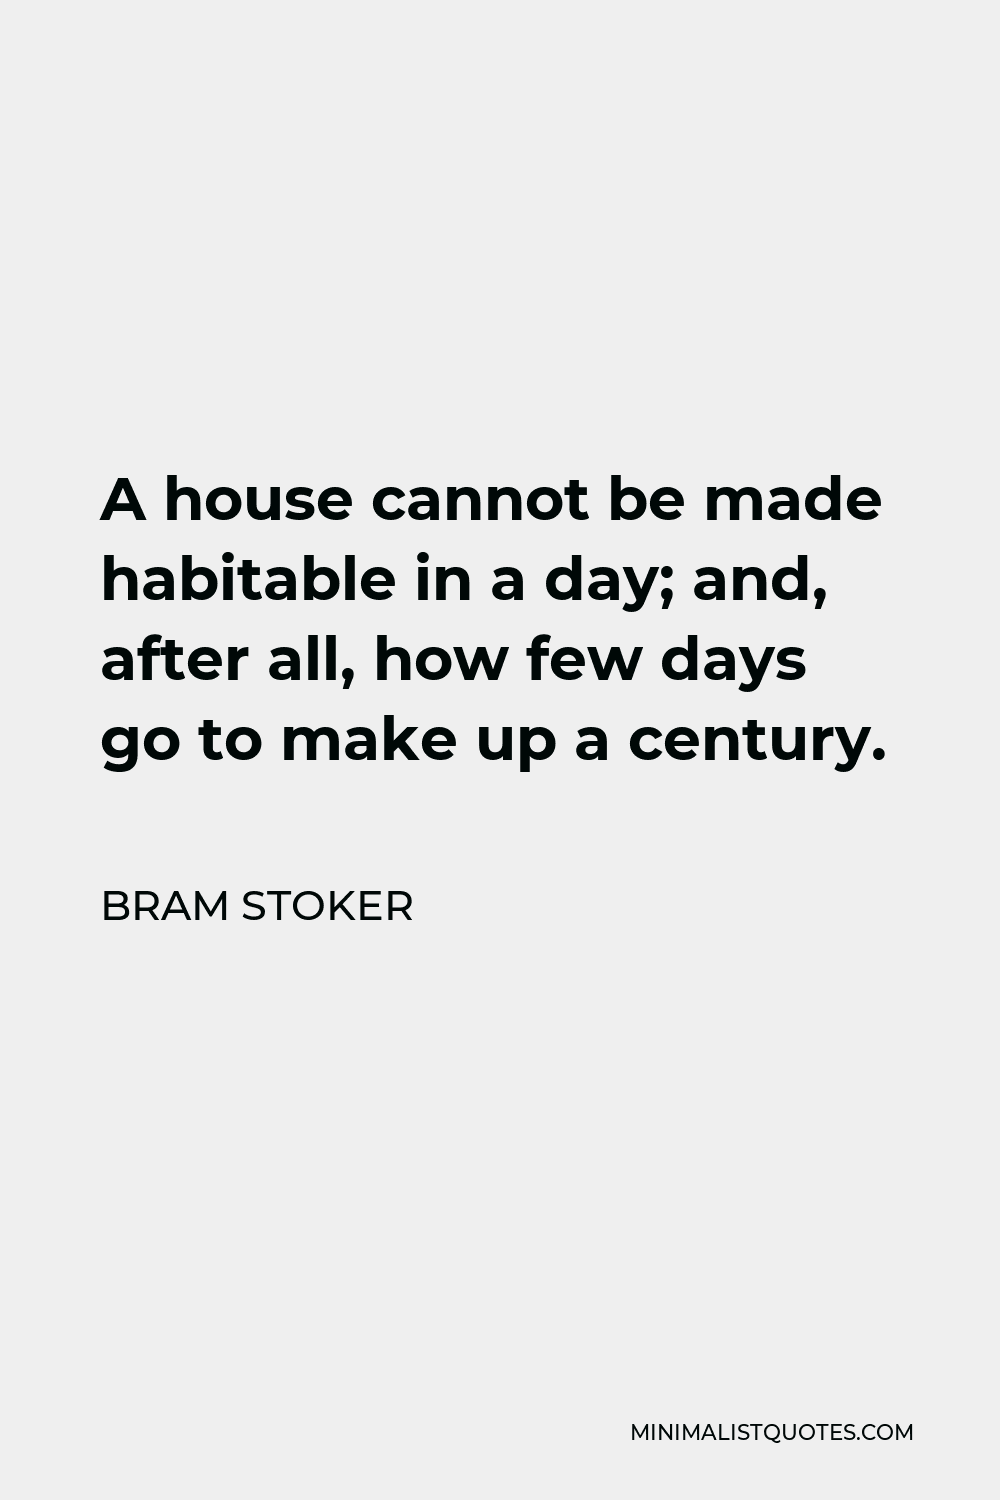 Bram Stoker Quote - A house cannot be made habitable in a day; and, after all, how few days go to make up a century.